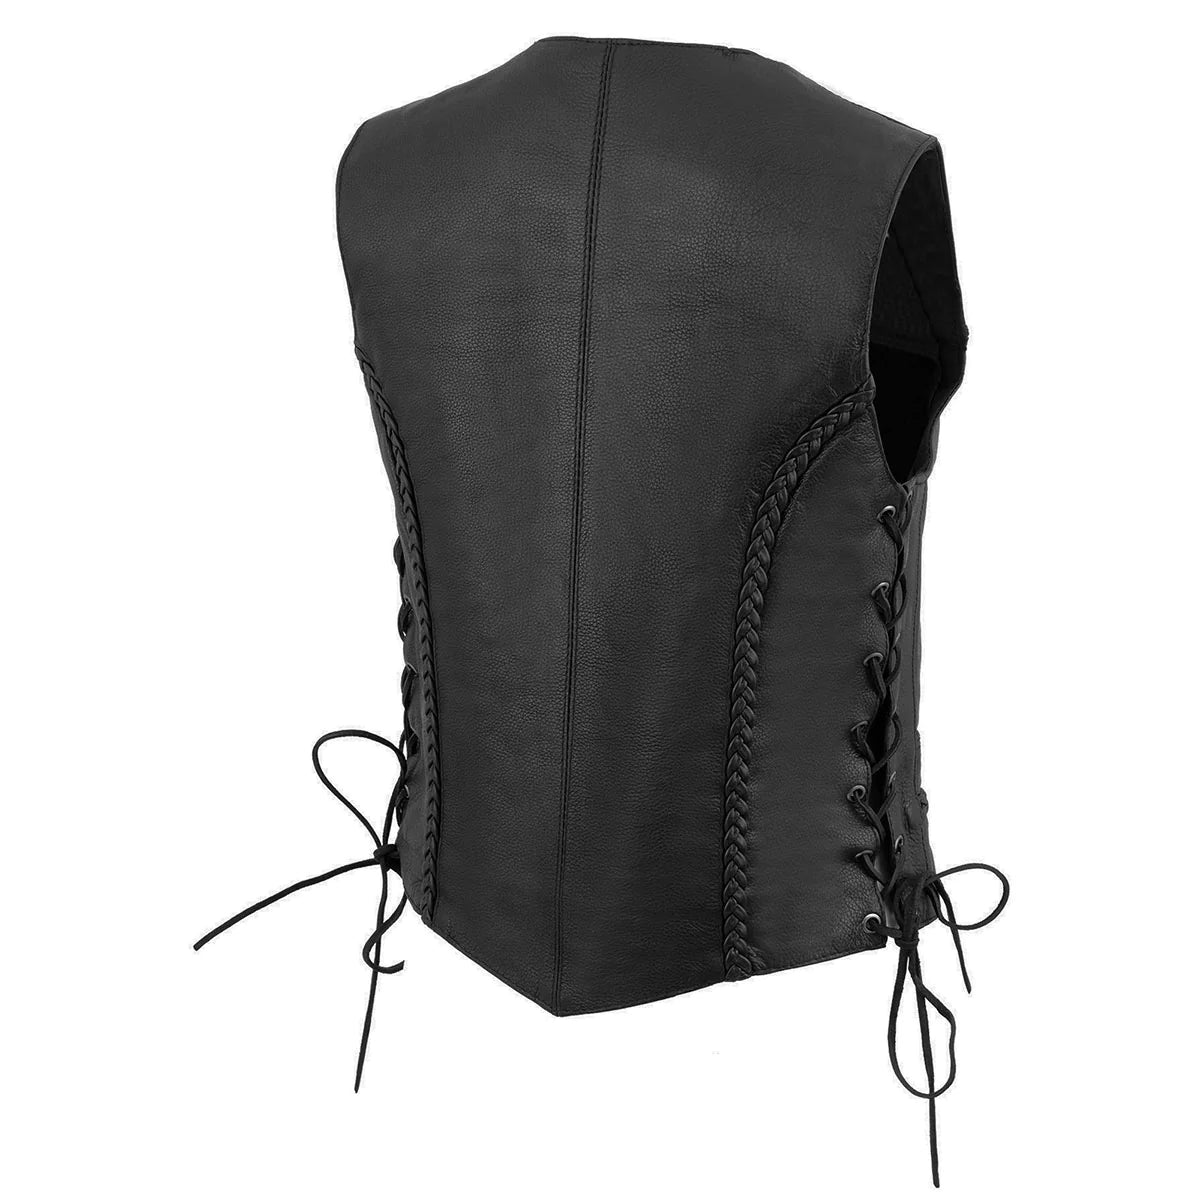 Women's Black Braided Naked Leather Side Lace Motorcycle Rider Vest W/Front Snap Closure